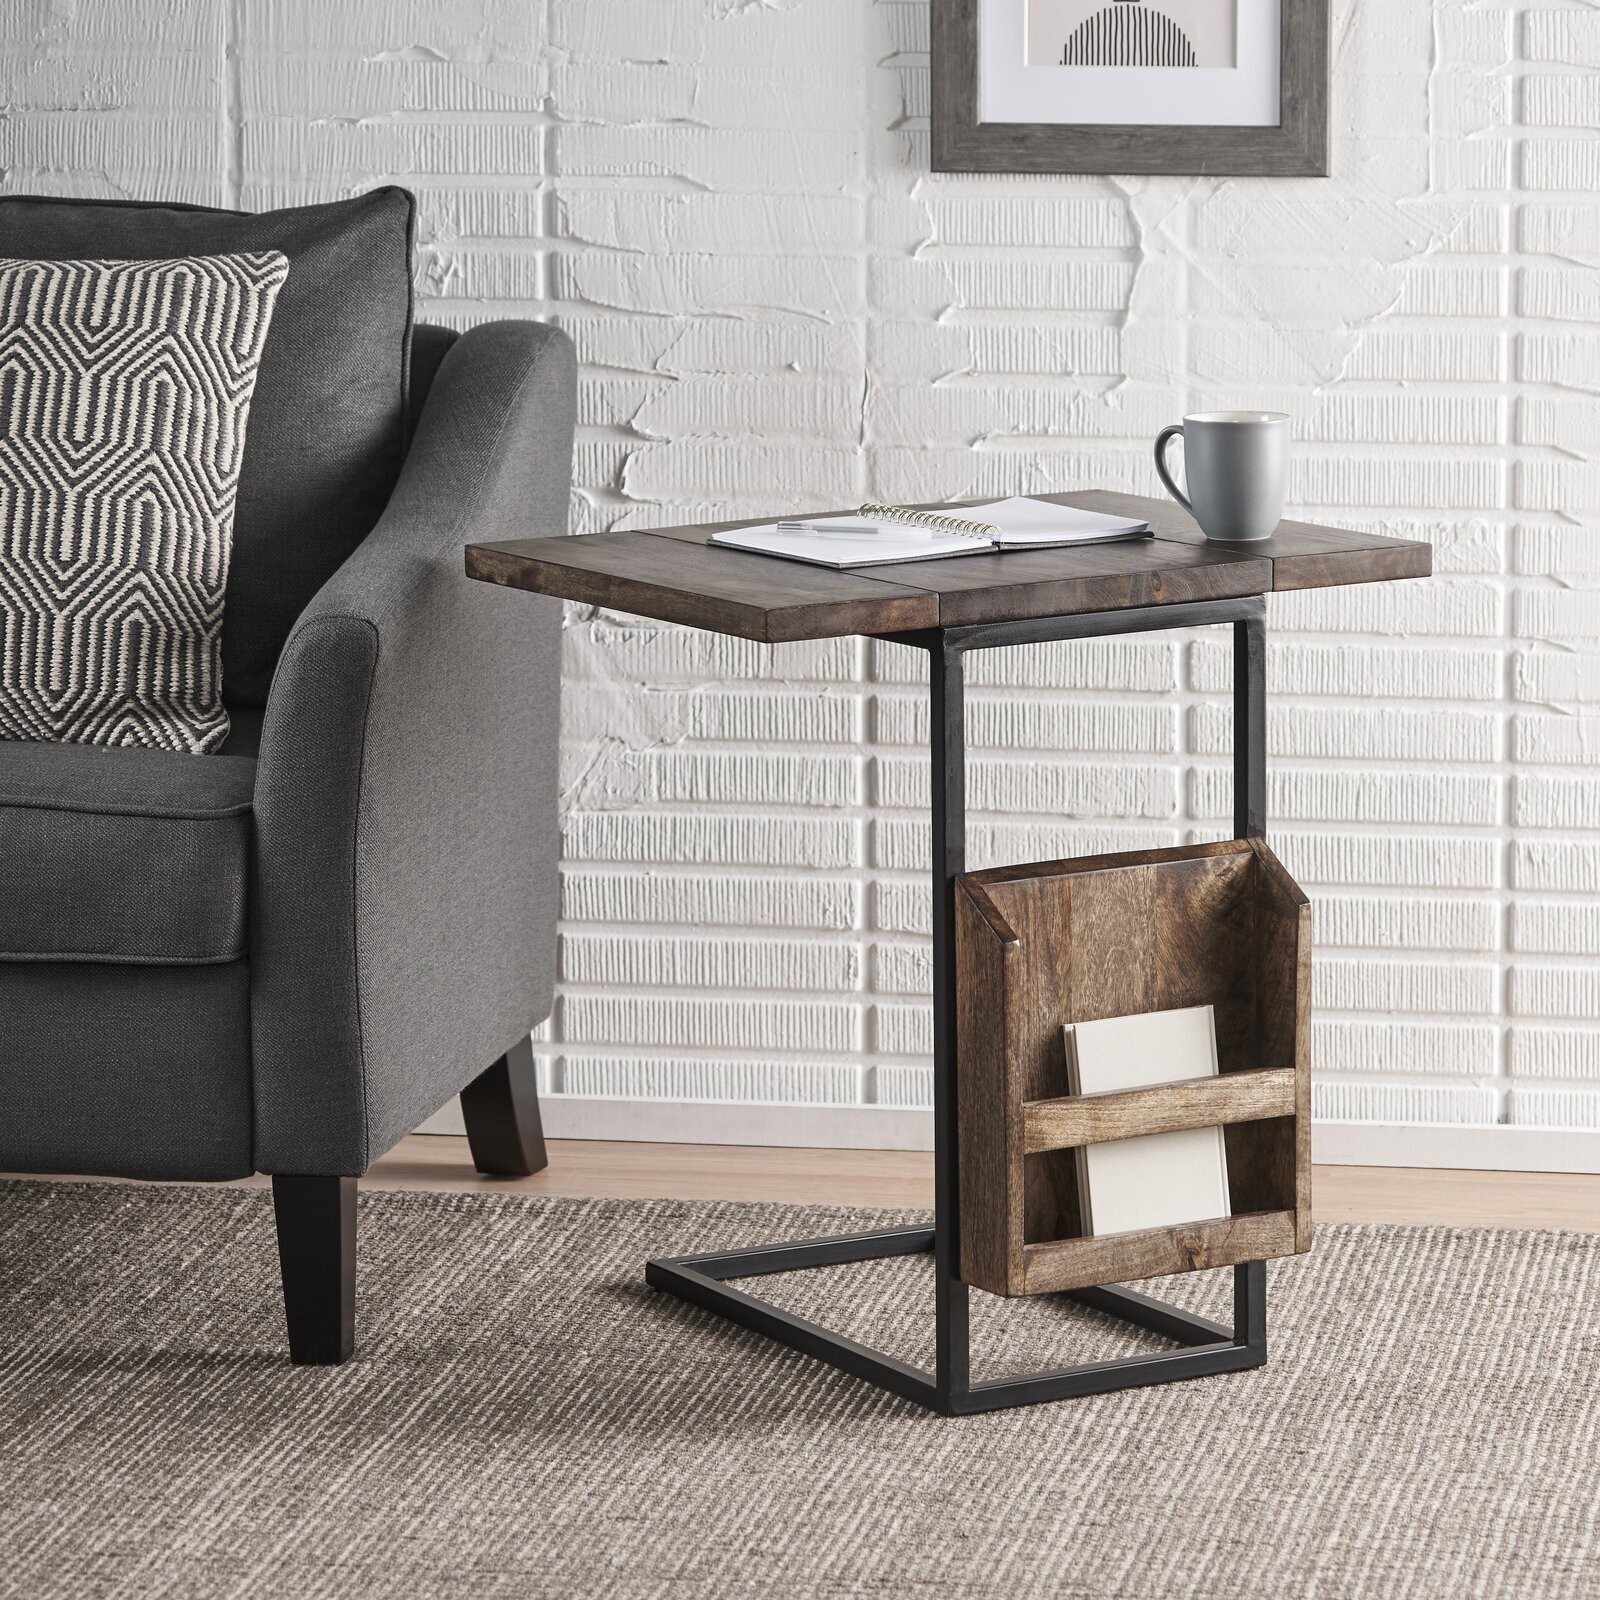 Narrow end table that could work in multiple locations